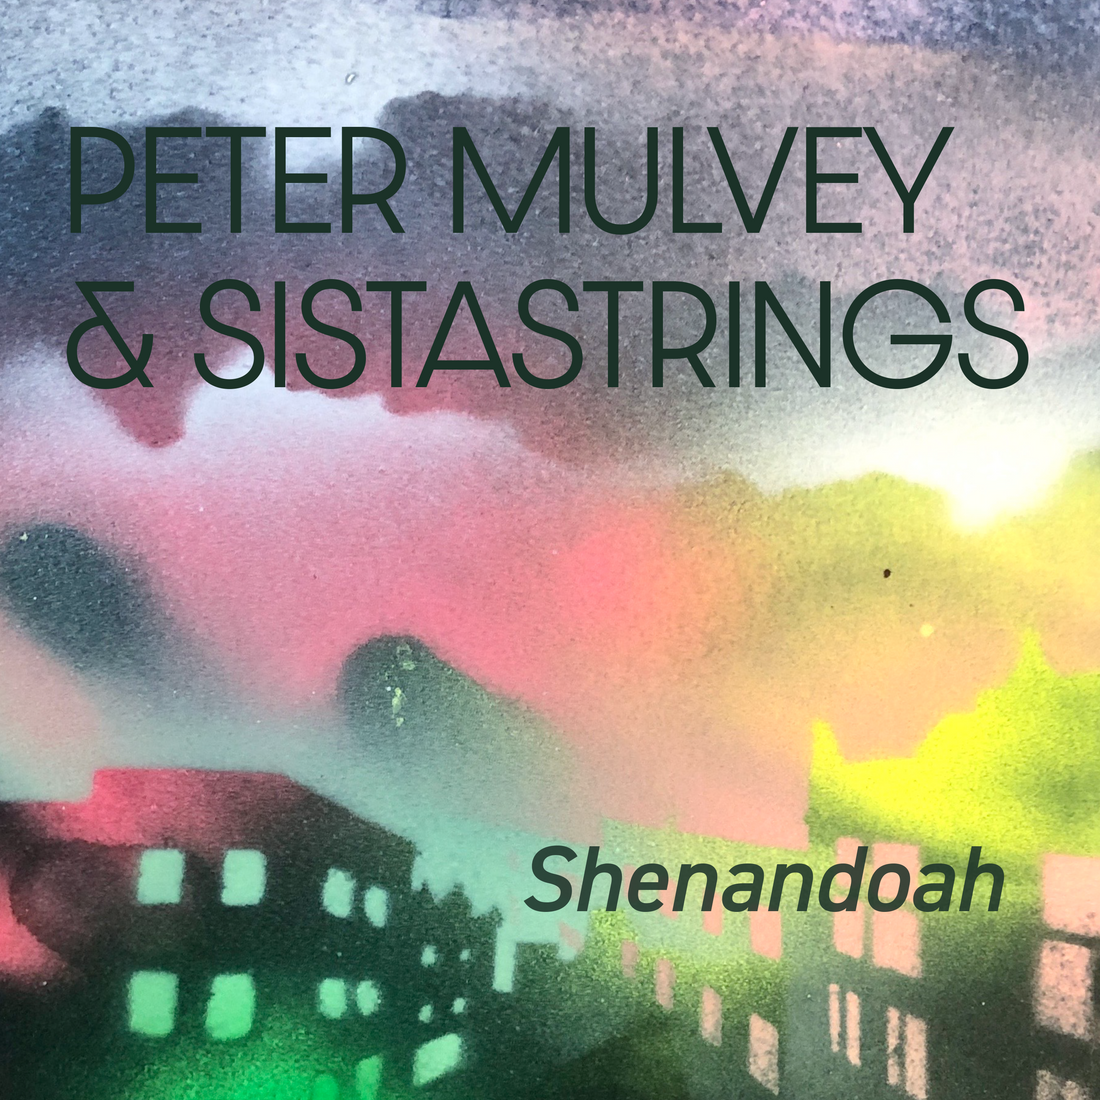 Announcing New Single from Peter Mulvey and SistaStrings: "Shenandoah"